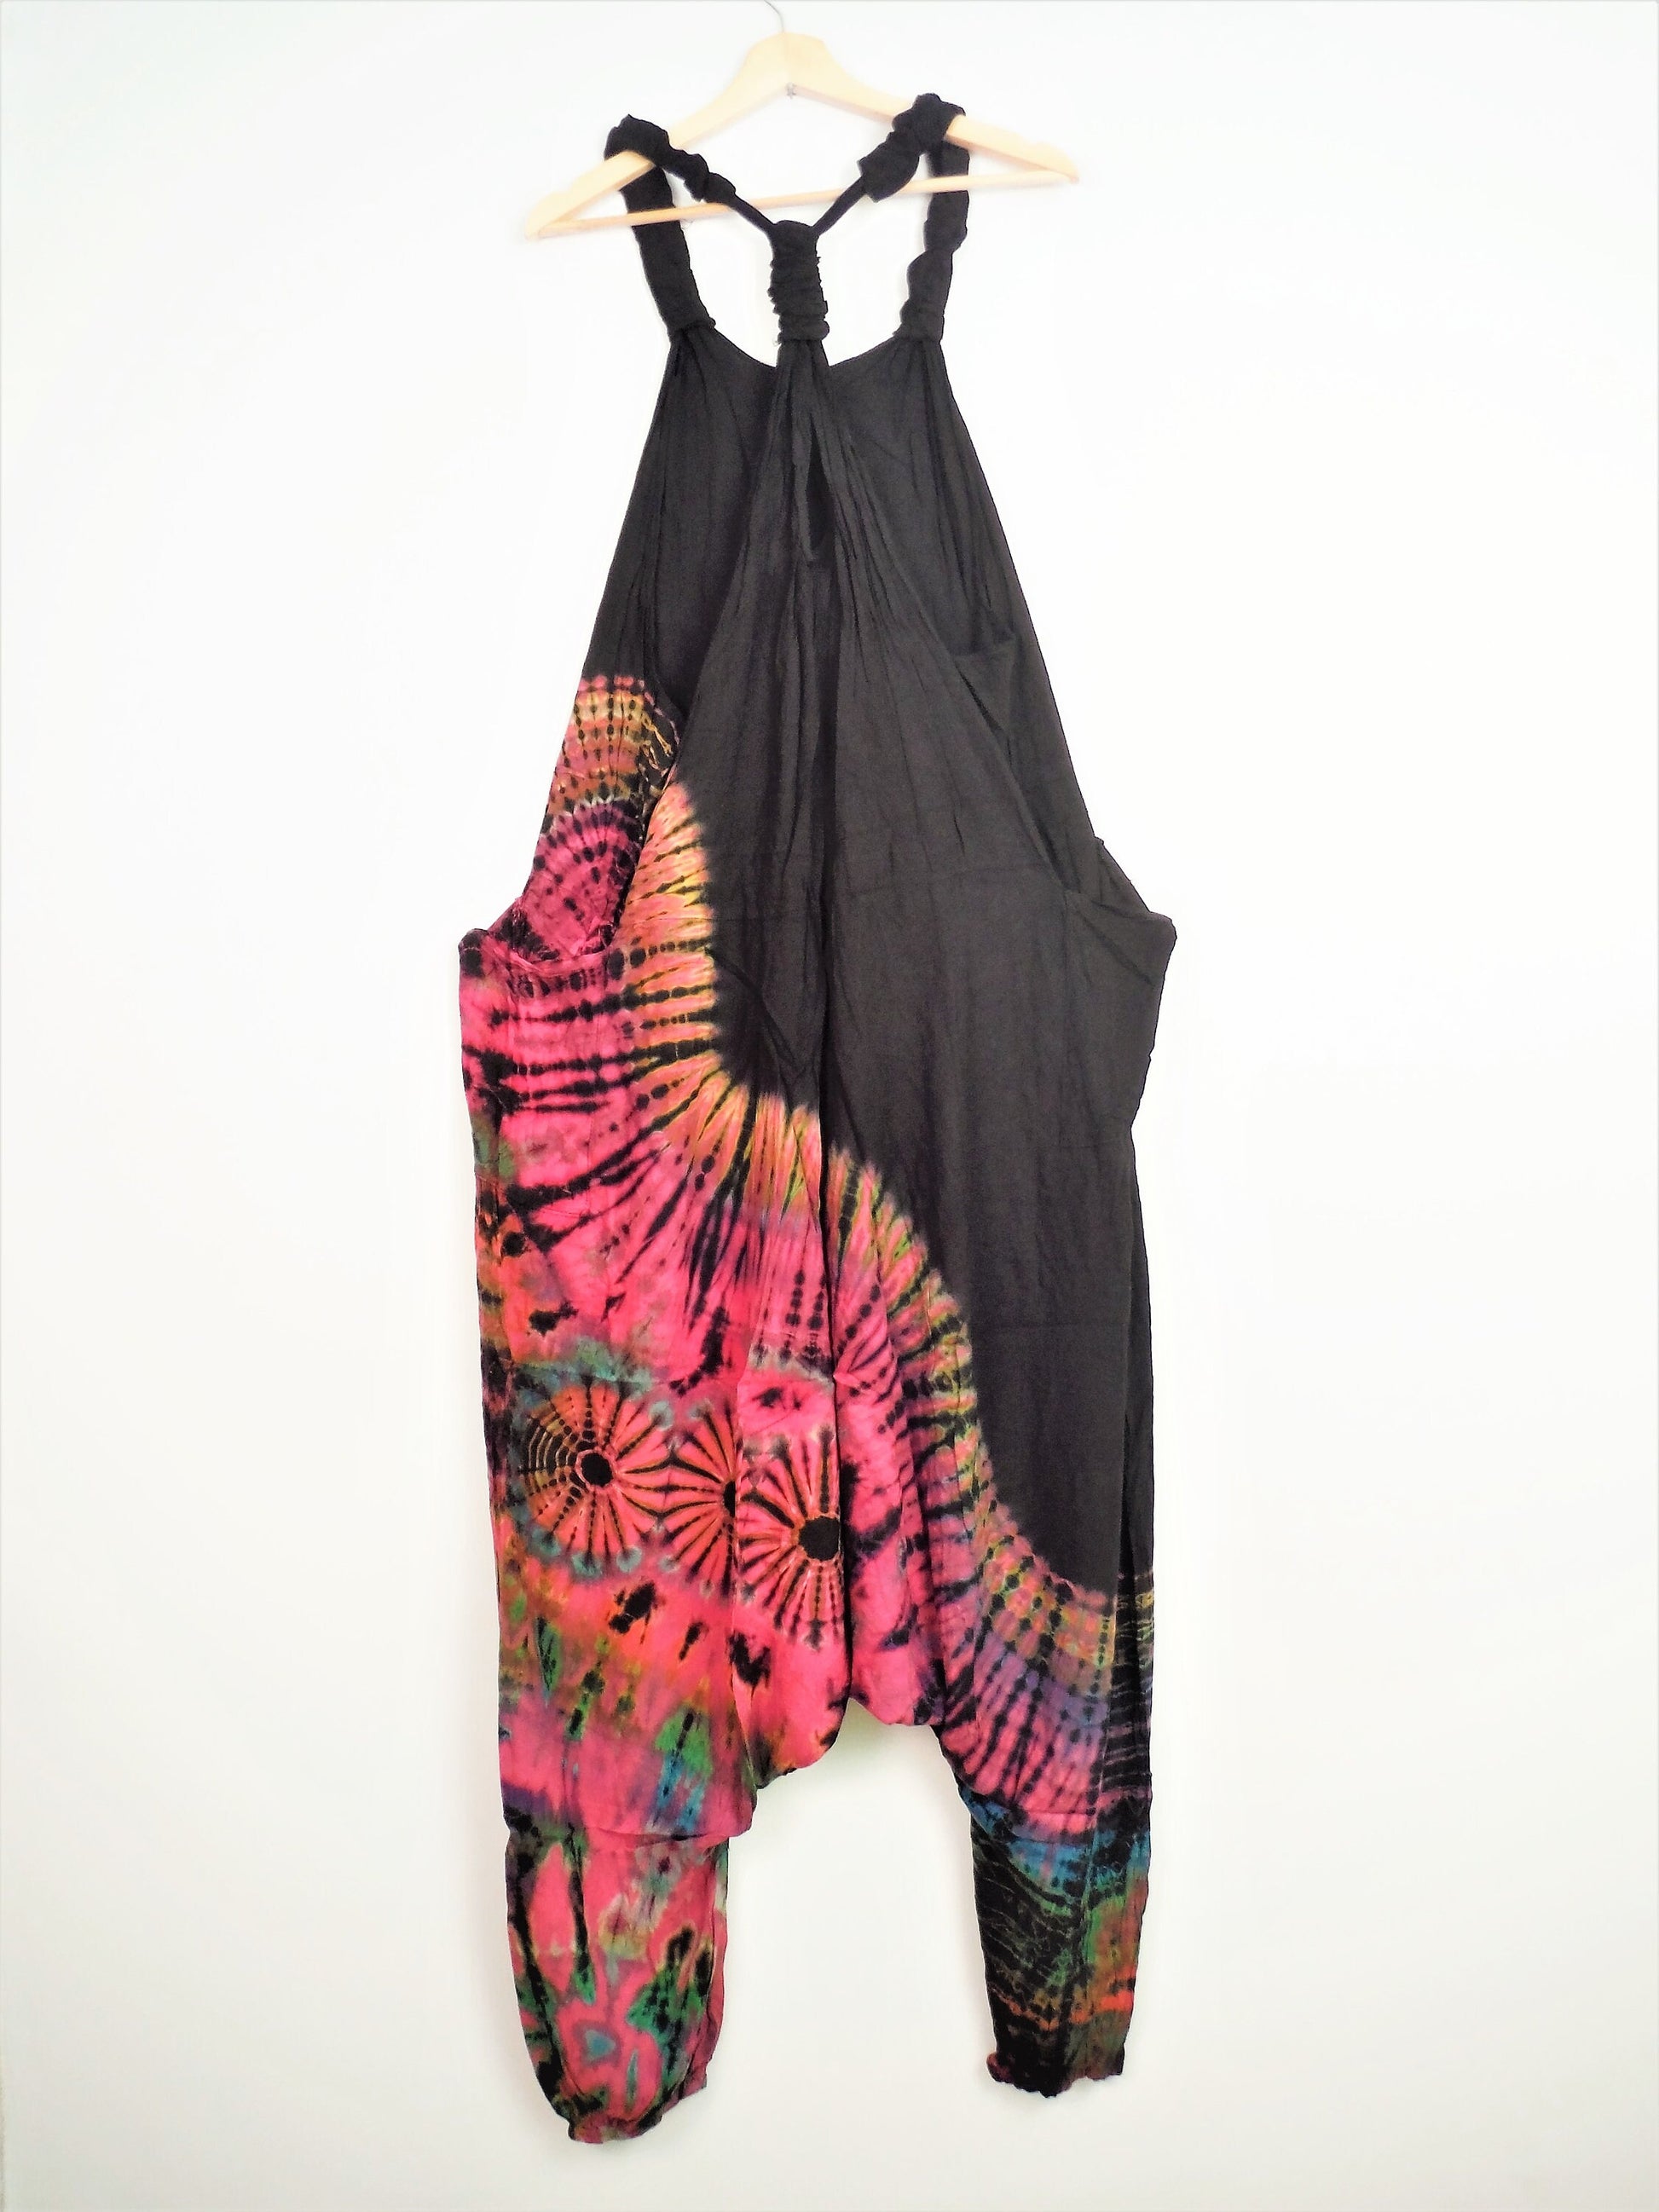 Half Tie-Dye Harem Dungarees - Black and Hot Pink - Bare Canvas